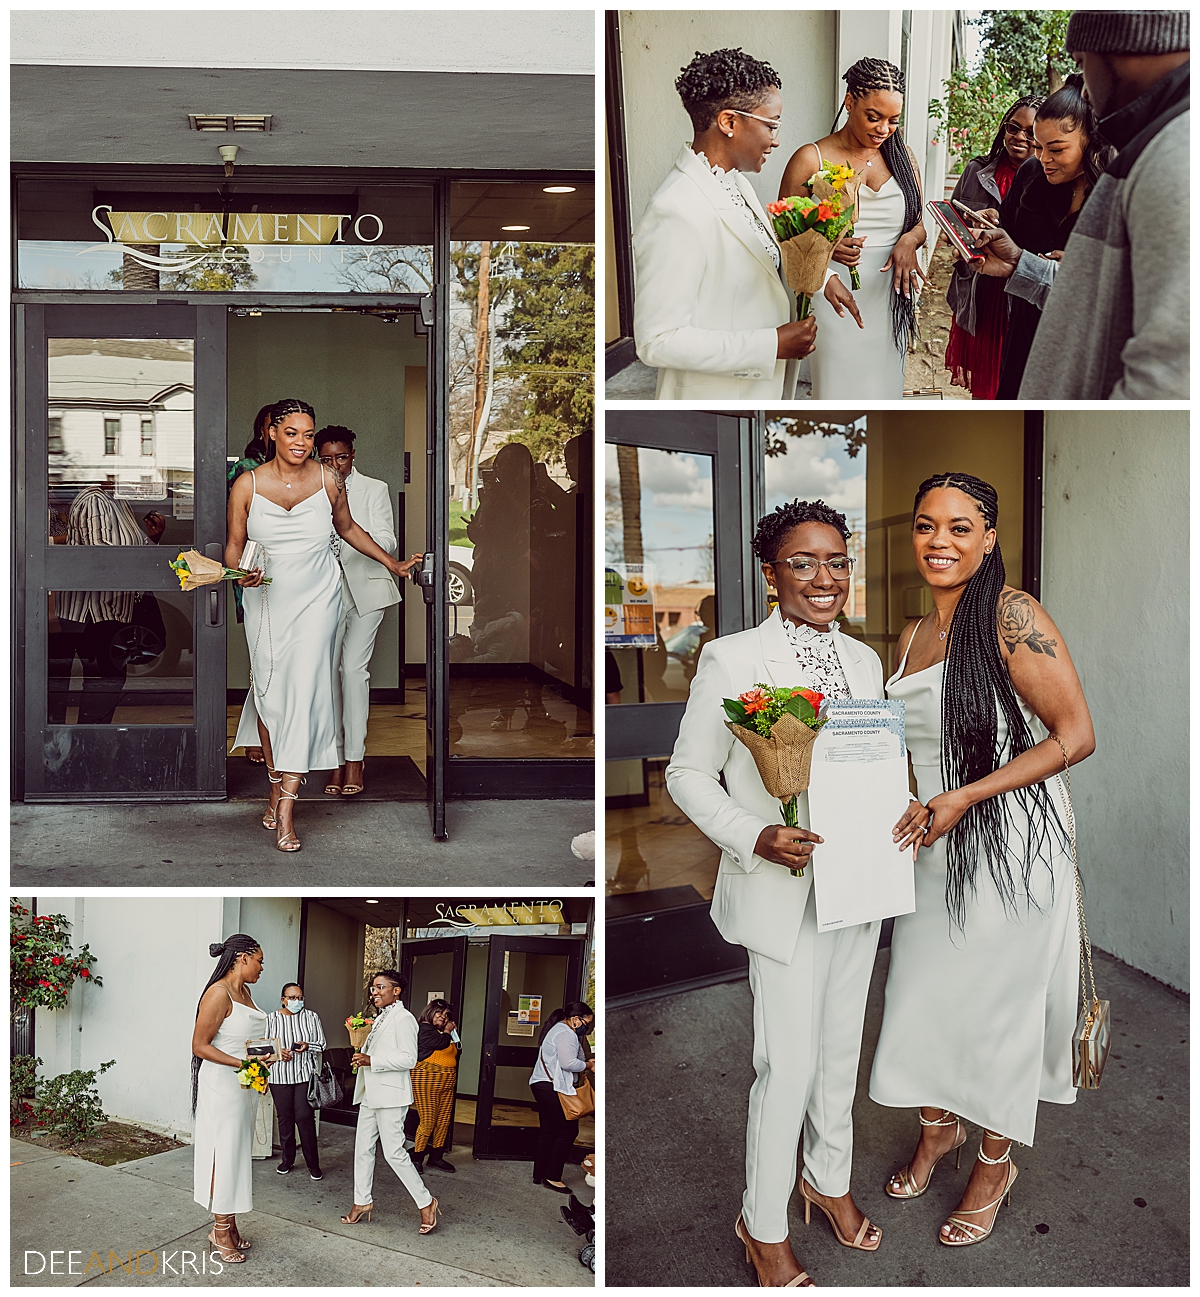 Four images: Top left image of couple emerging from the courthouse doors after their civil ceremony. Top right image of couple being greeted by family and friends. Bottom left image of couple smiling at each other. Bottom right image of couple holding marriage certificate and flowers.